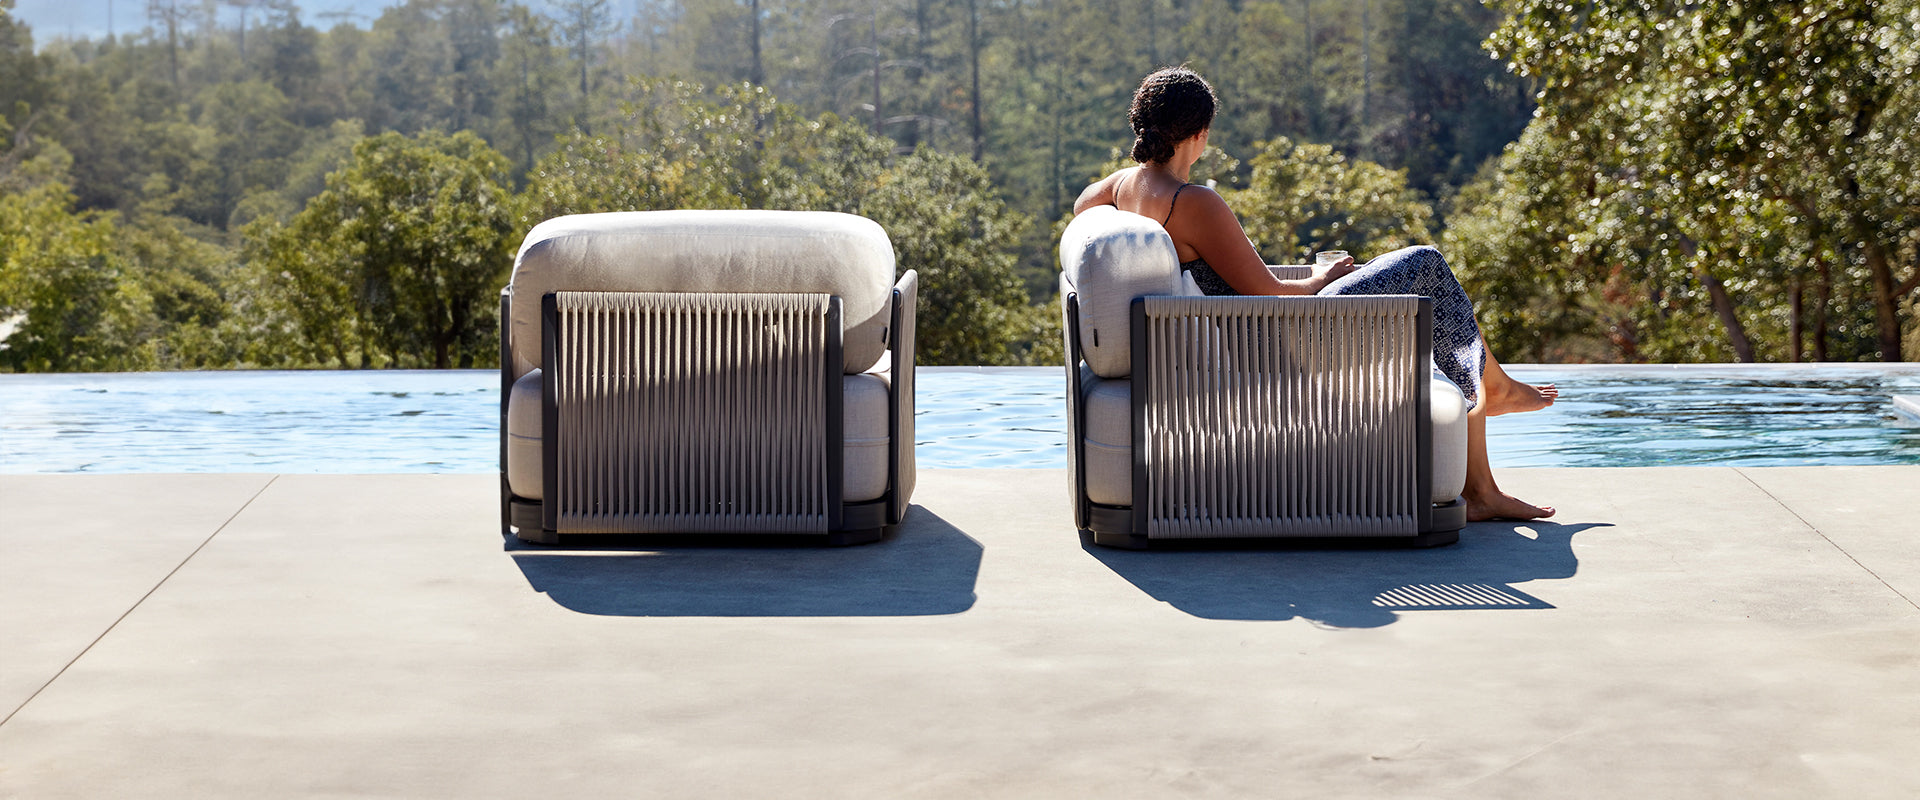 Woven Rope Outdoor Furniture - Chairs, Sofas & More, Terra Outdoor